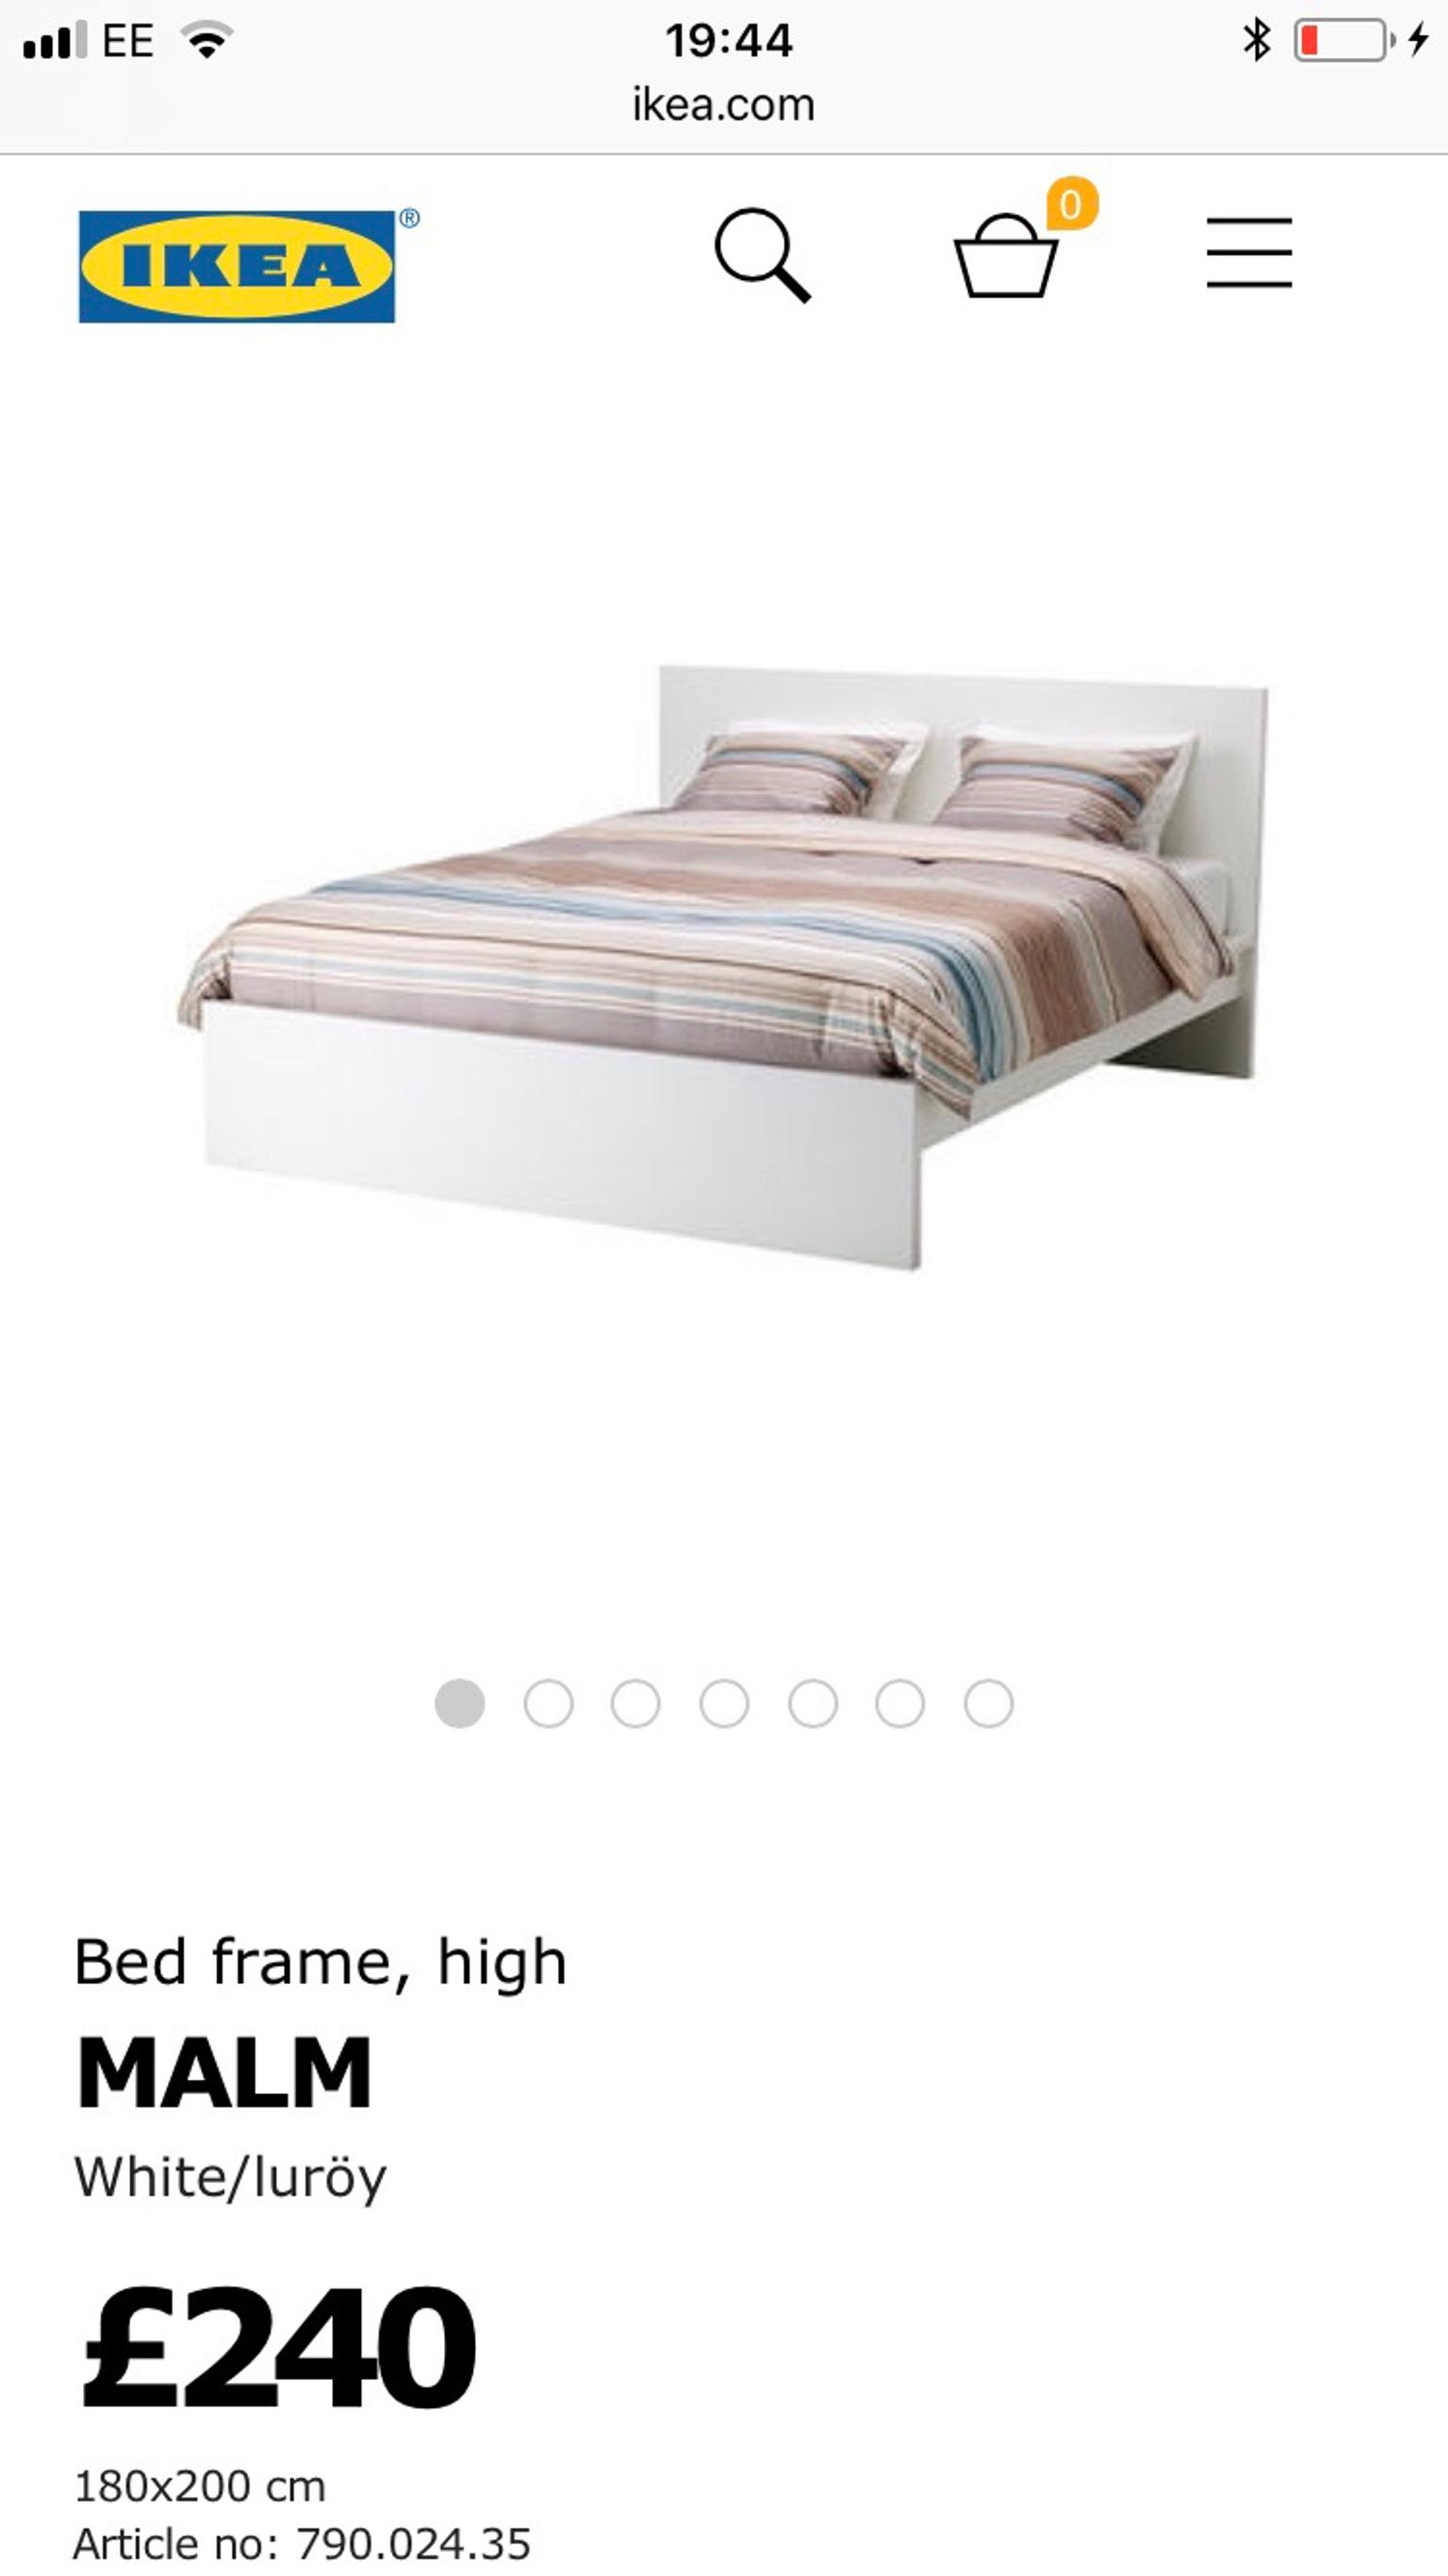 Malm Ikea Super King Size Bed Frame In, Ikea Malm Bed King Size White